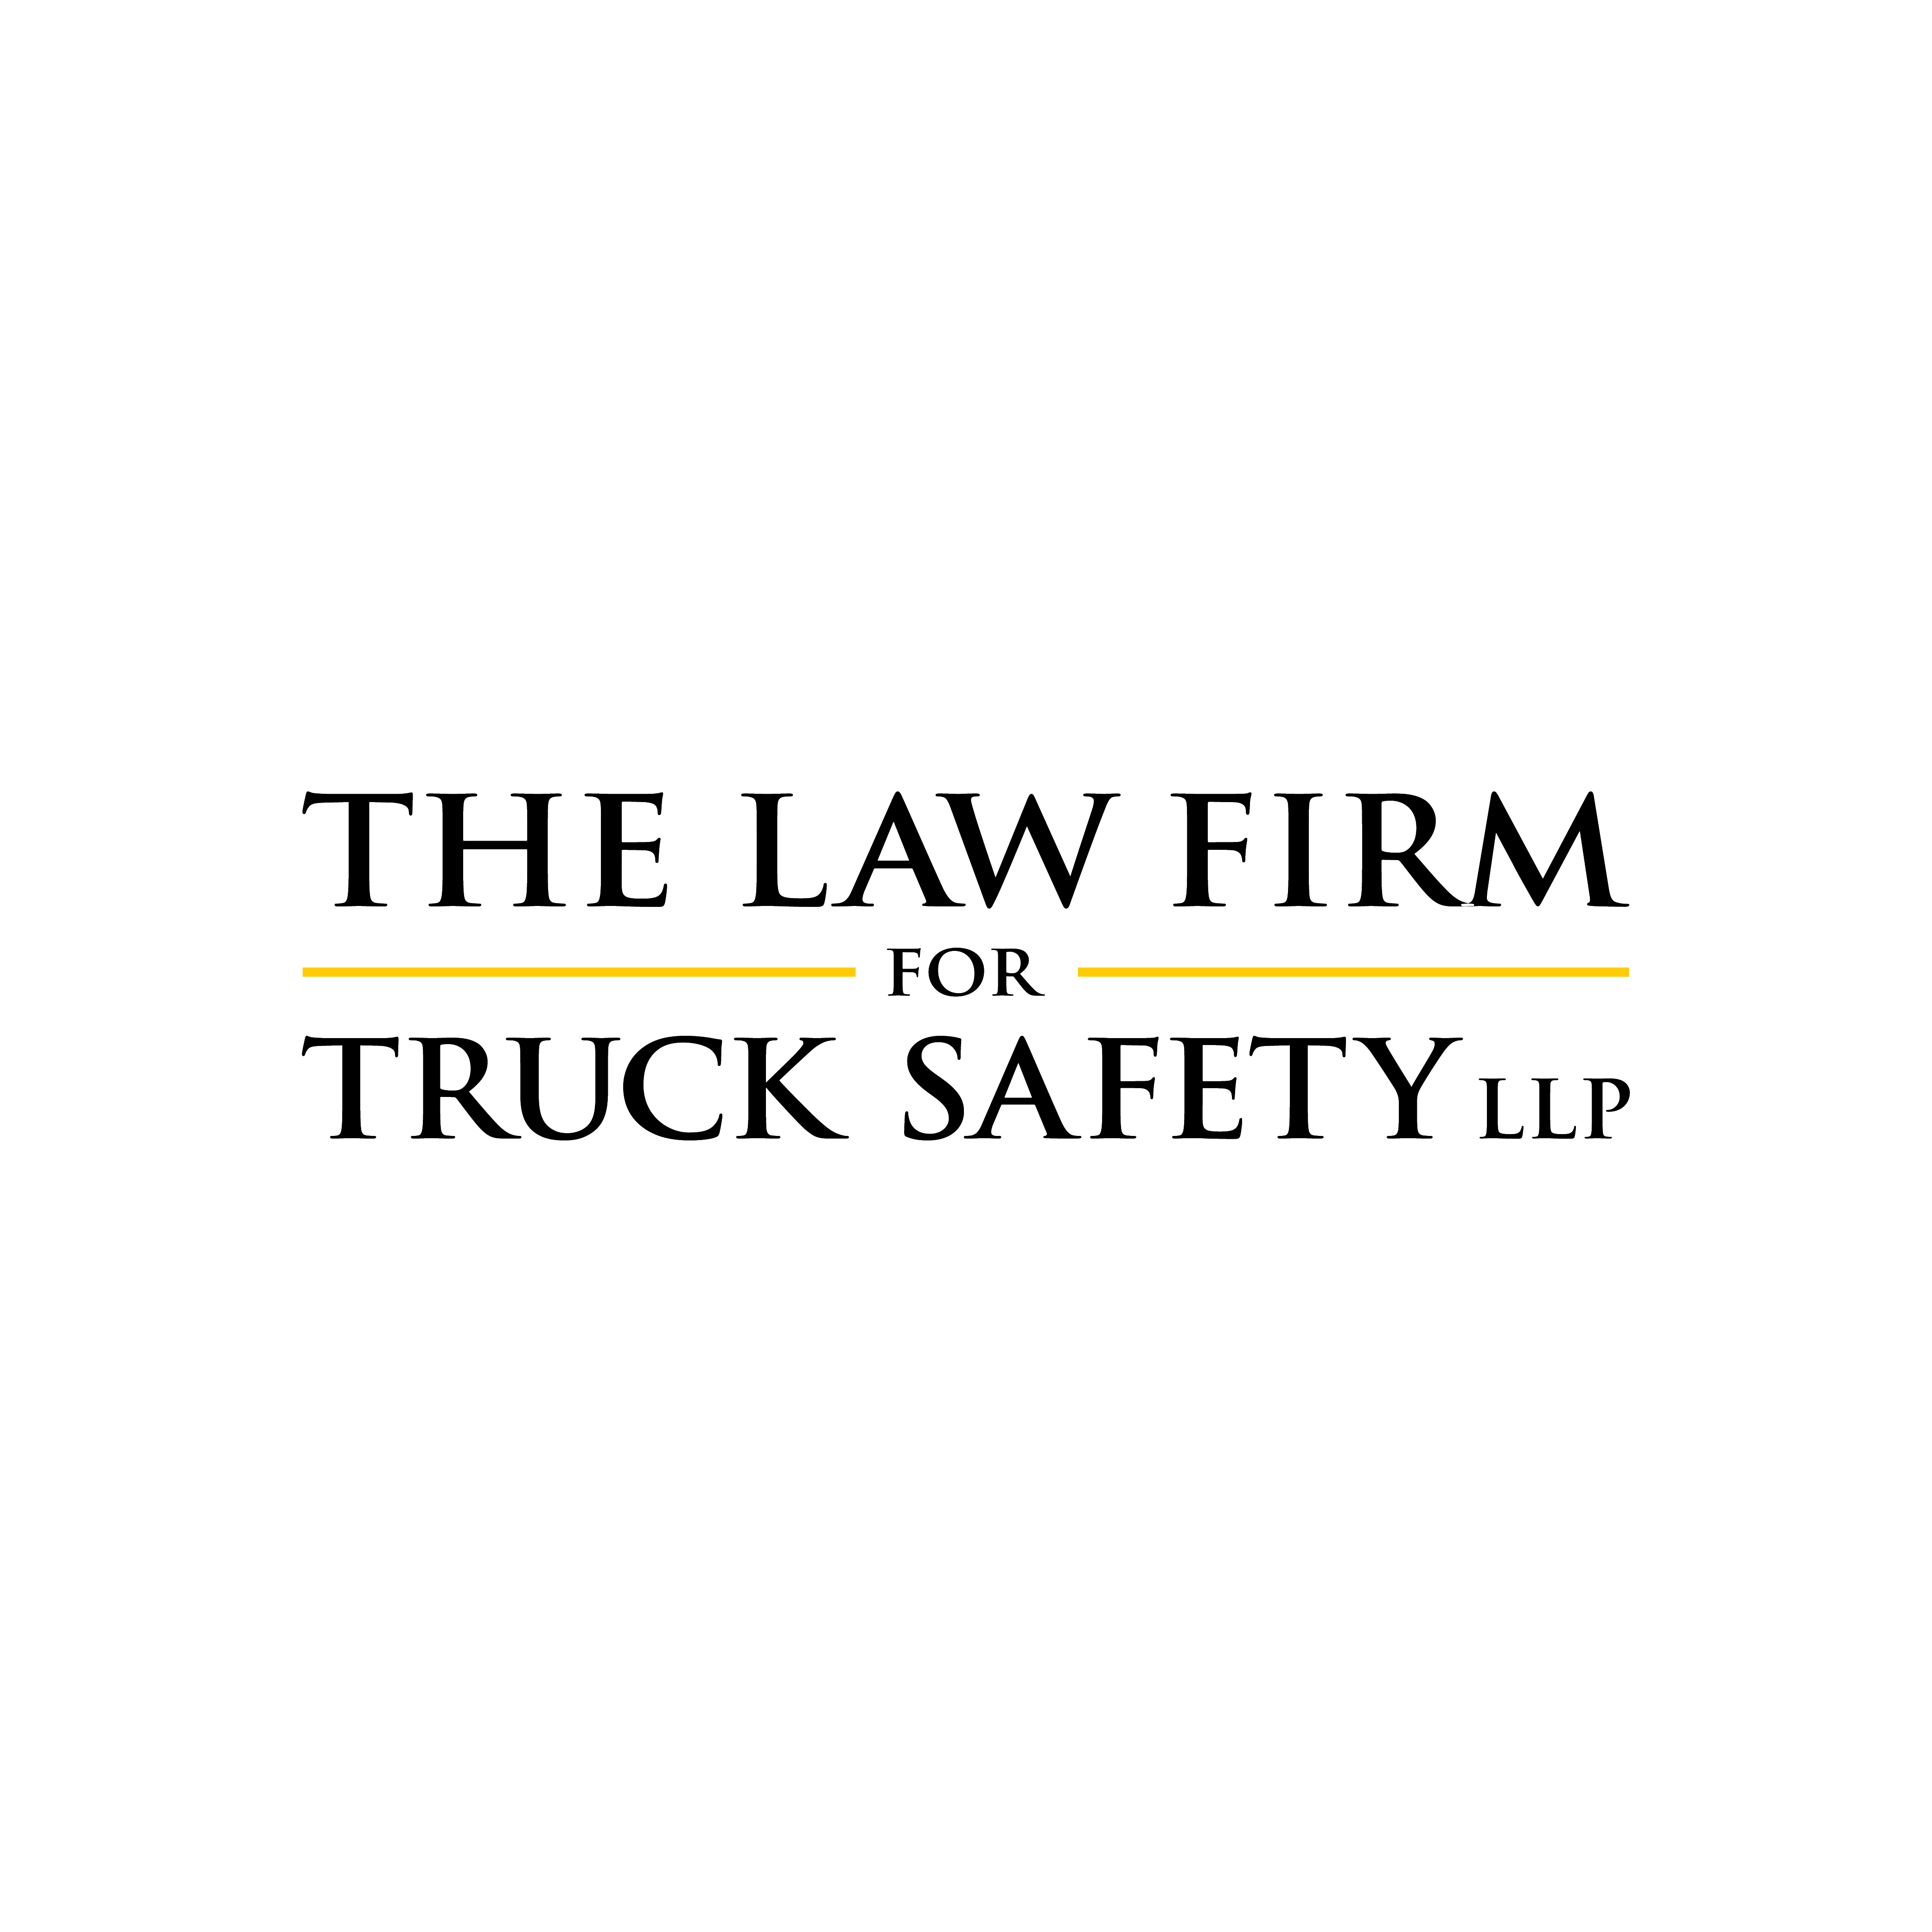 The Law Firm for Truck Safety - Toledo - Toledo, OH 43606 - (800)628-4500 | ShowMeLocal.com